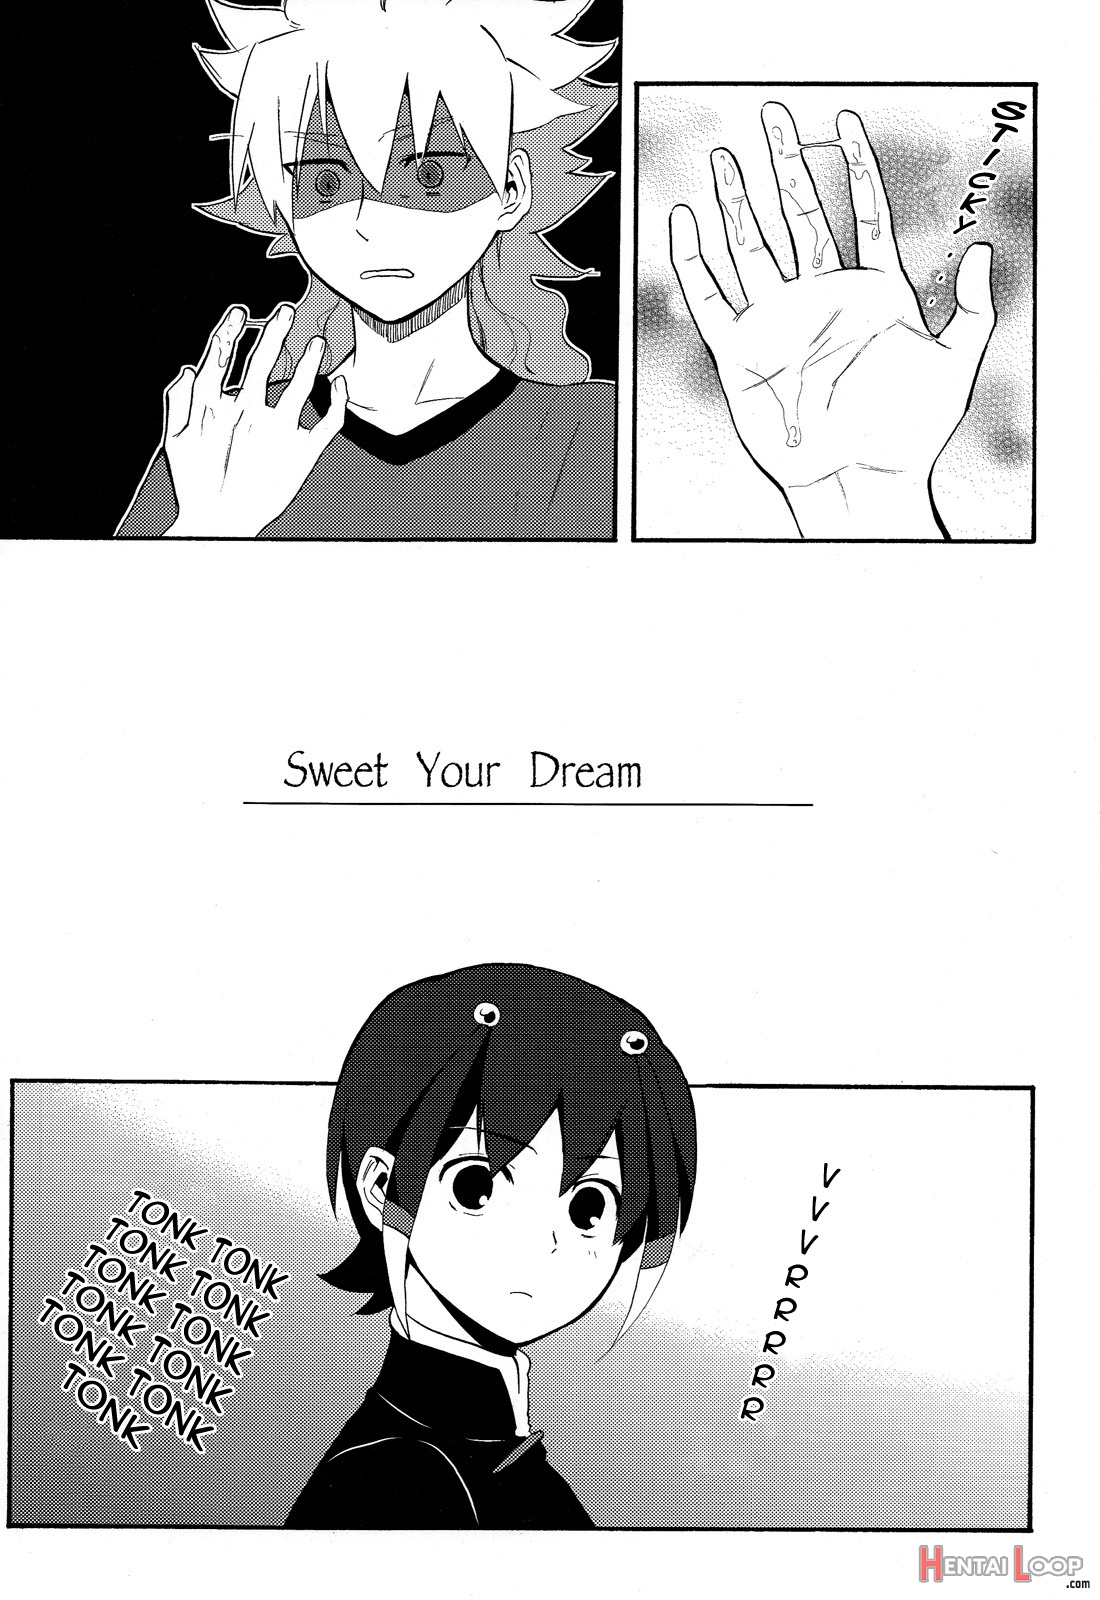 Sweet Your Dream page 6